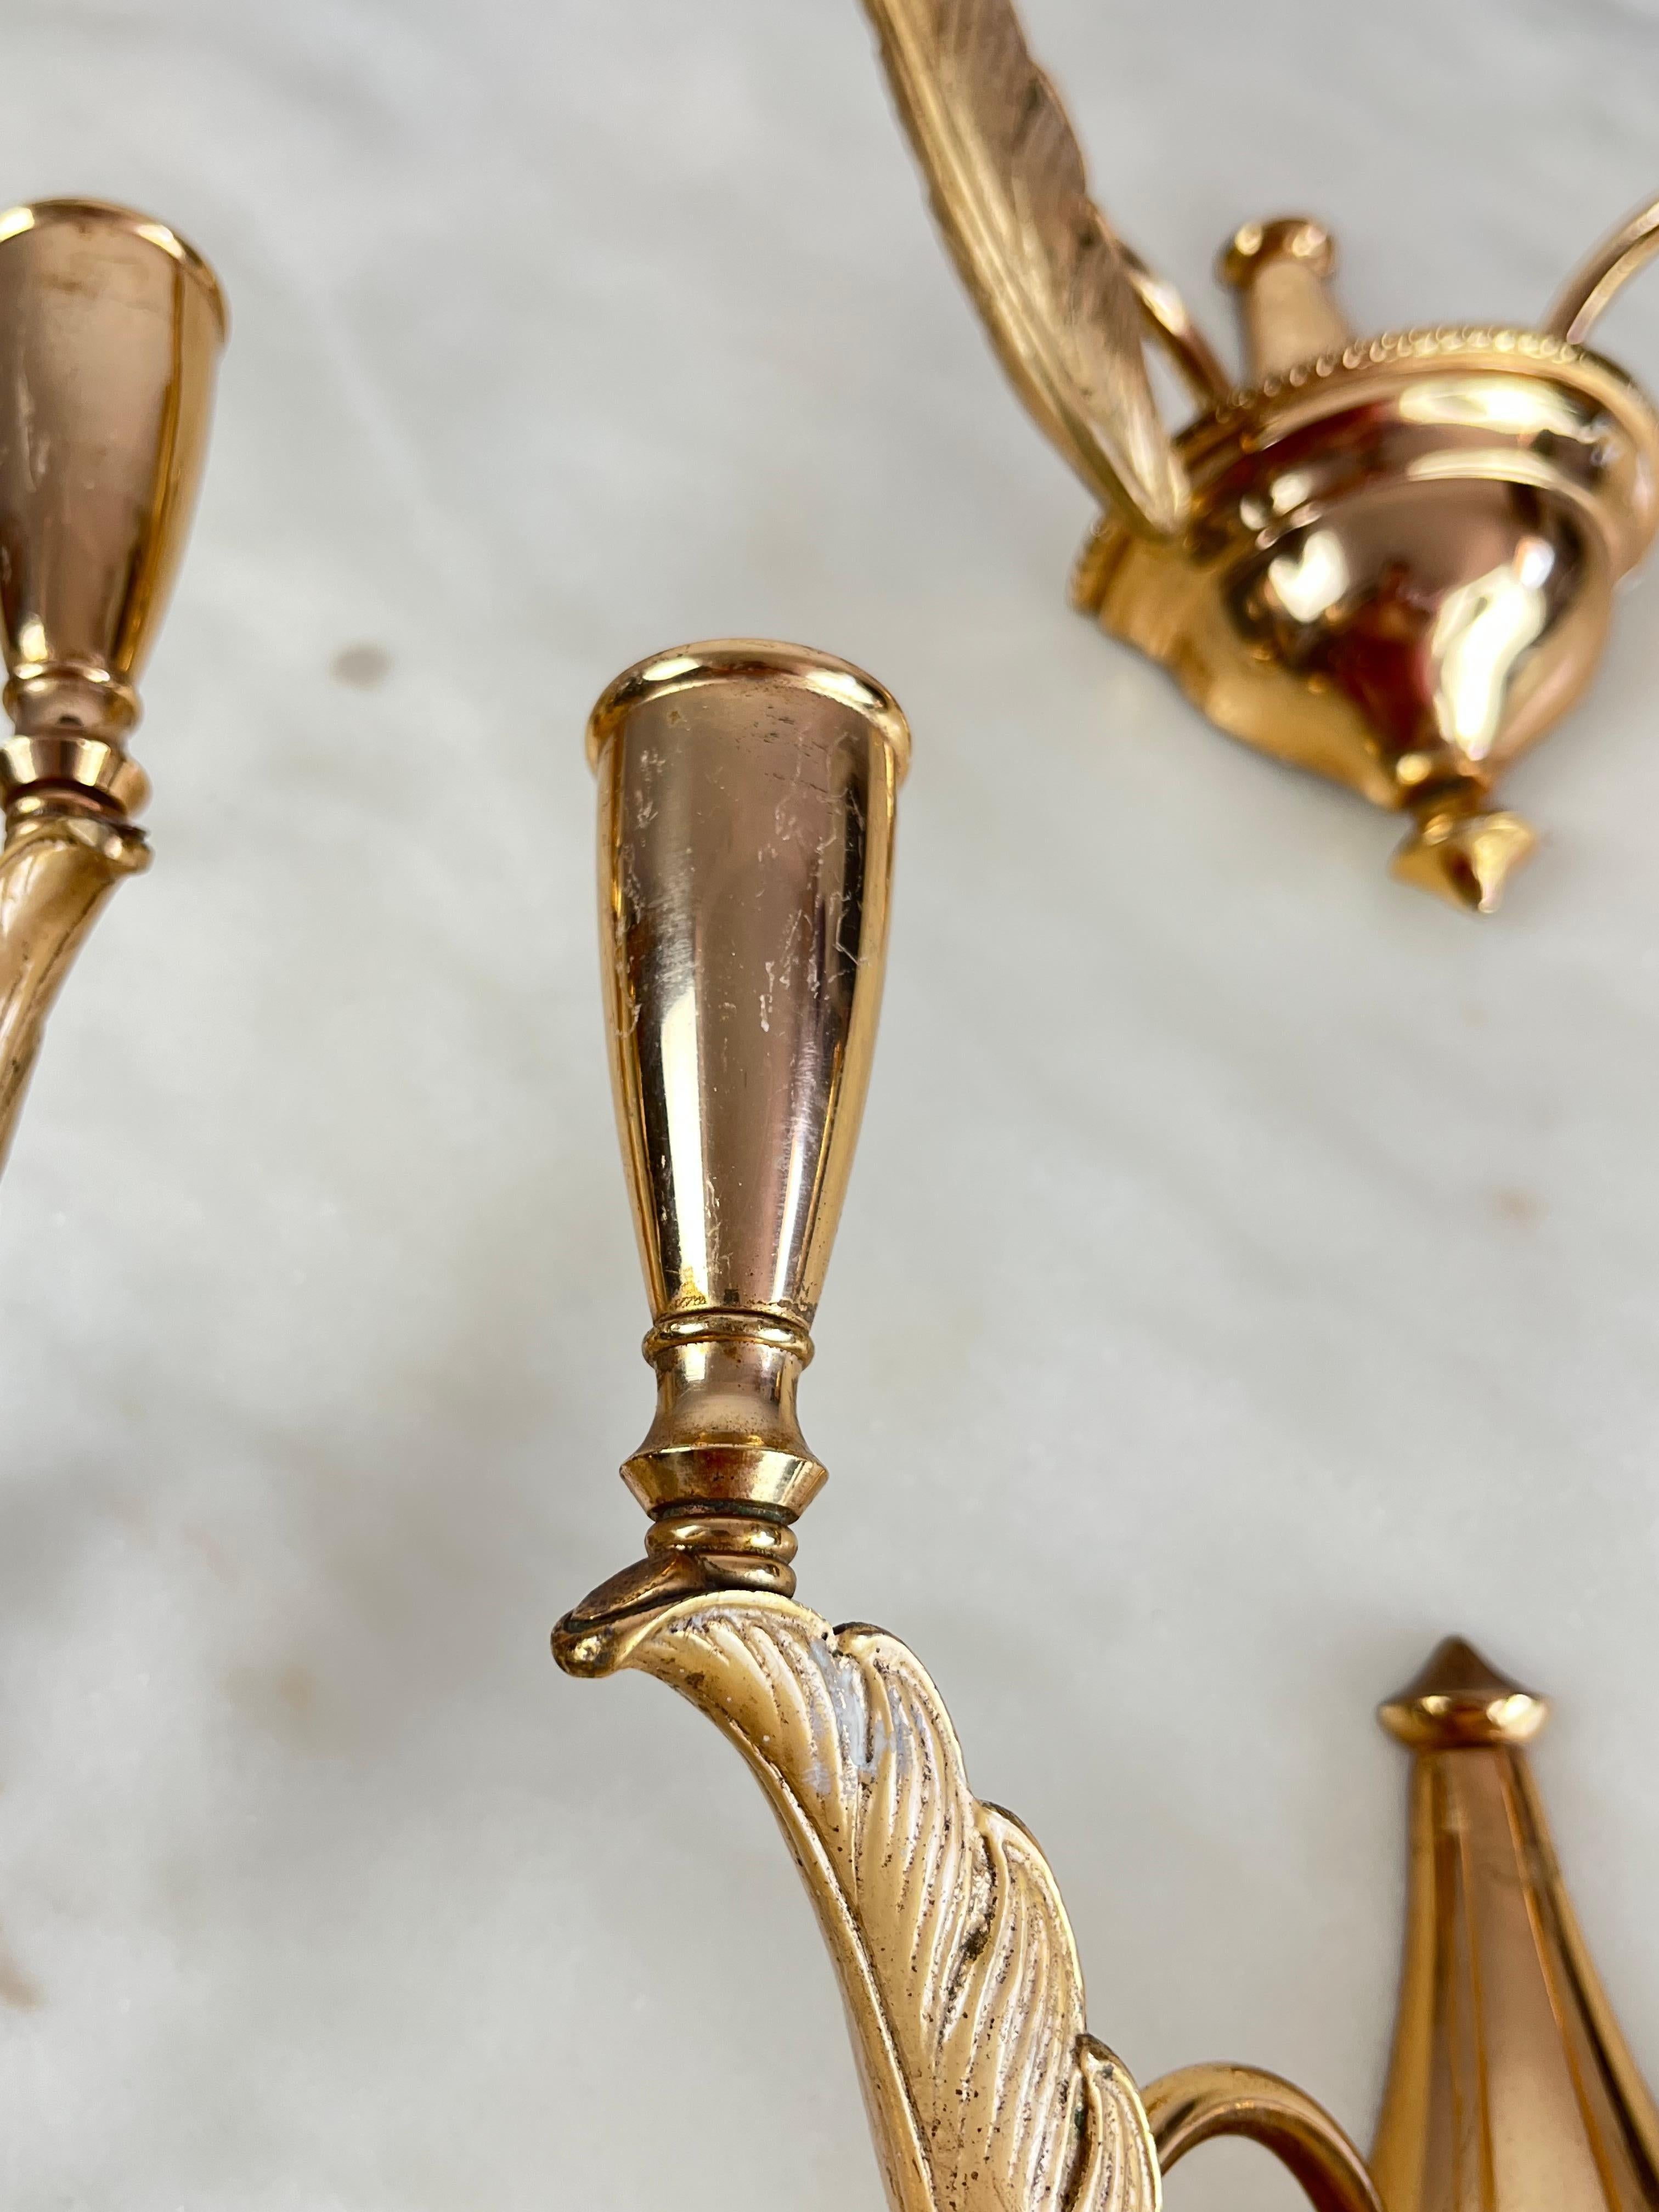 Set of 4 Mid-Century Brass Wall Lamp Sconces, Italy, 1960s For Sale 1